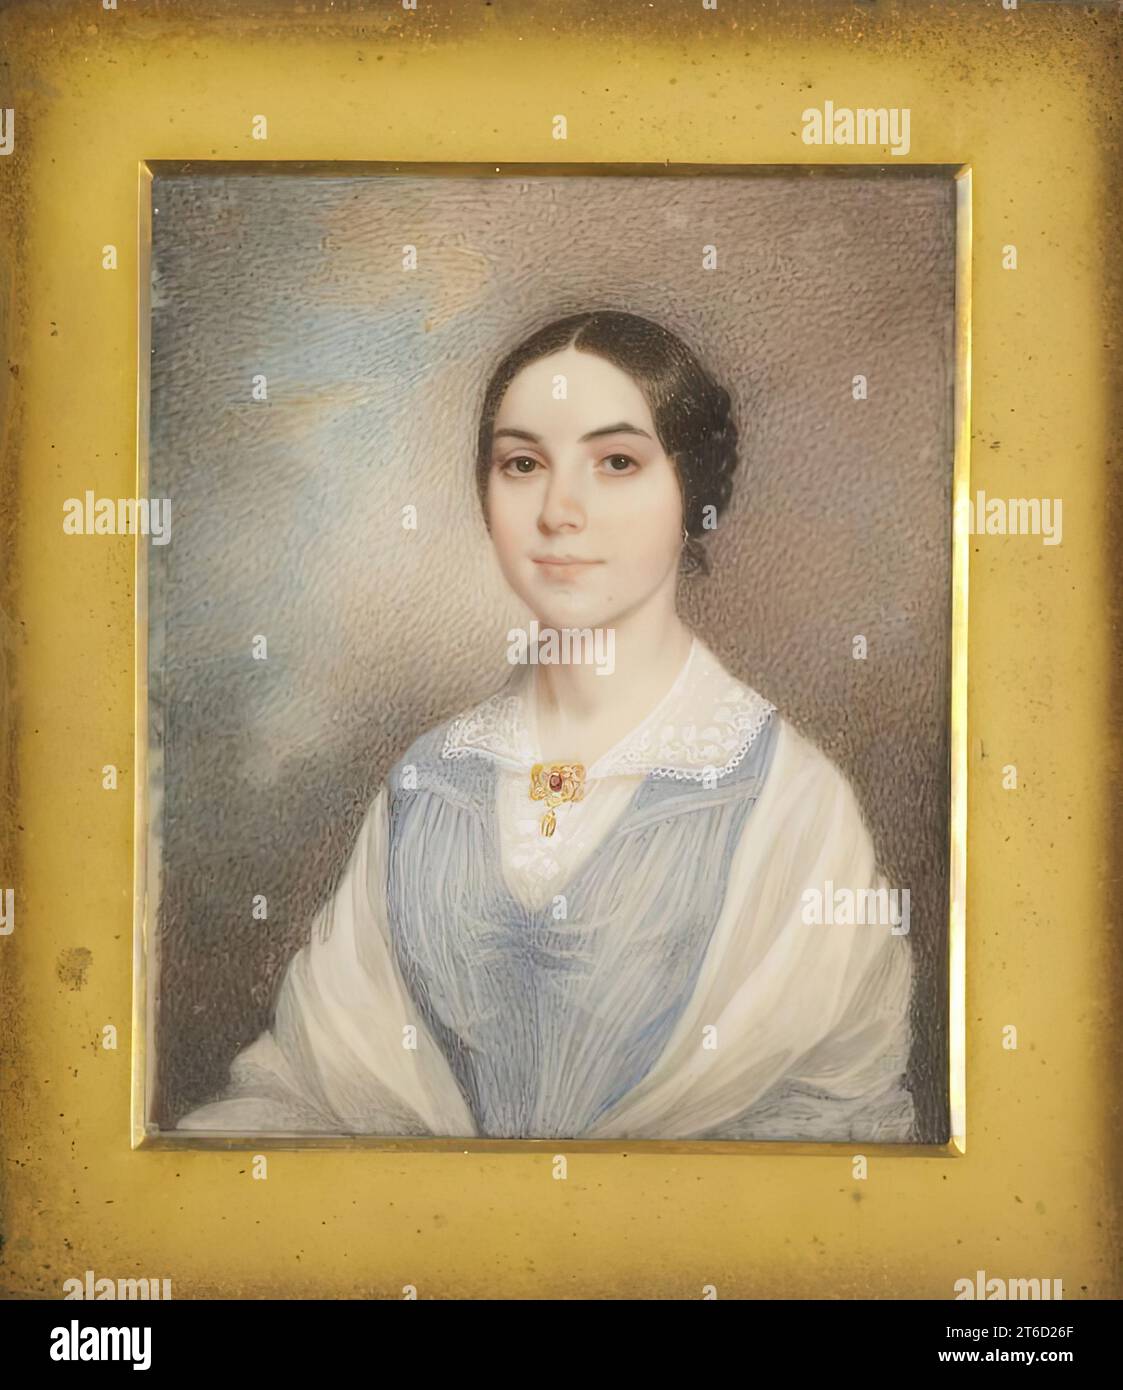 Miss Elizabeth Sarah Faber, c1846. Elizabeth Sarah Faber (1825-1882) was the daughter of Henry F. Faber and Sarah Faber (n&#xe9;e Seabrook) of Charleston, South Carolina. Her father was a rice planter who lived near Adams Run. In 1846 the sitter was 21 years old. That year was significant for Elizabeth as she came of age and received the significant sum of $6000 from her grandfather's (Thomas Bannister Seabrook's) will, drawn up in 1827, but which came into effect on his death on 19 April 1839. Stock Photo